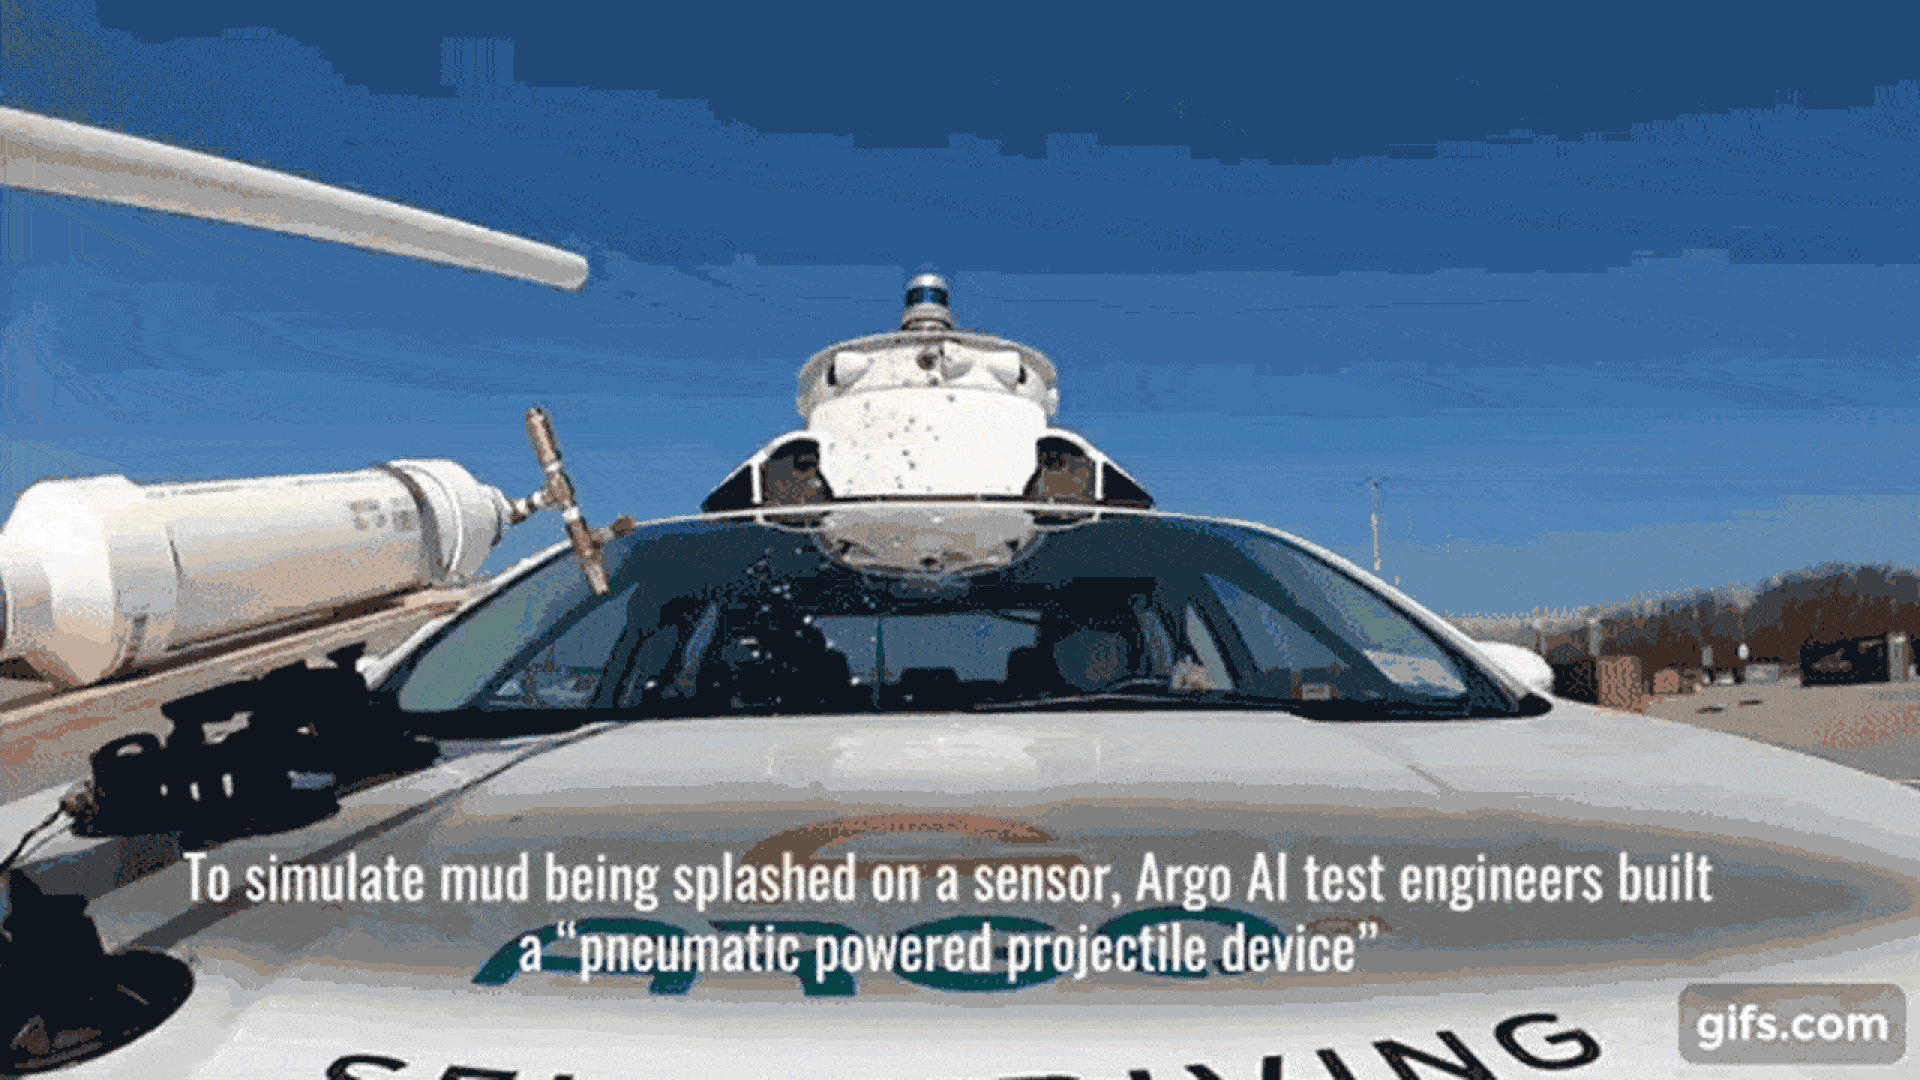 Animated GIF of a device built by Argo AI test engineers to simulate mud on a car